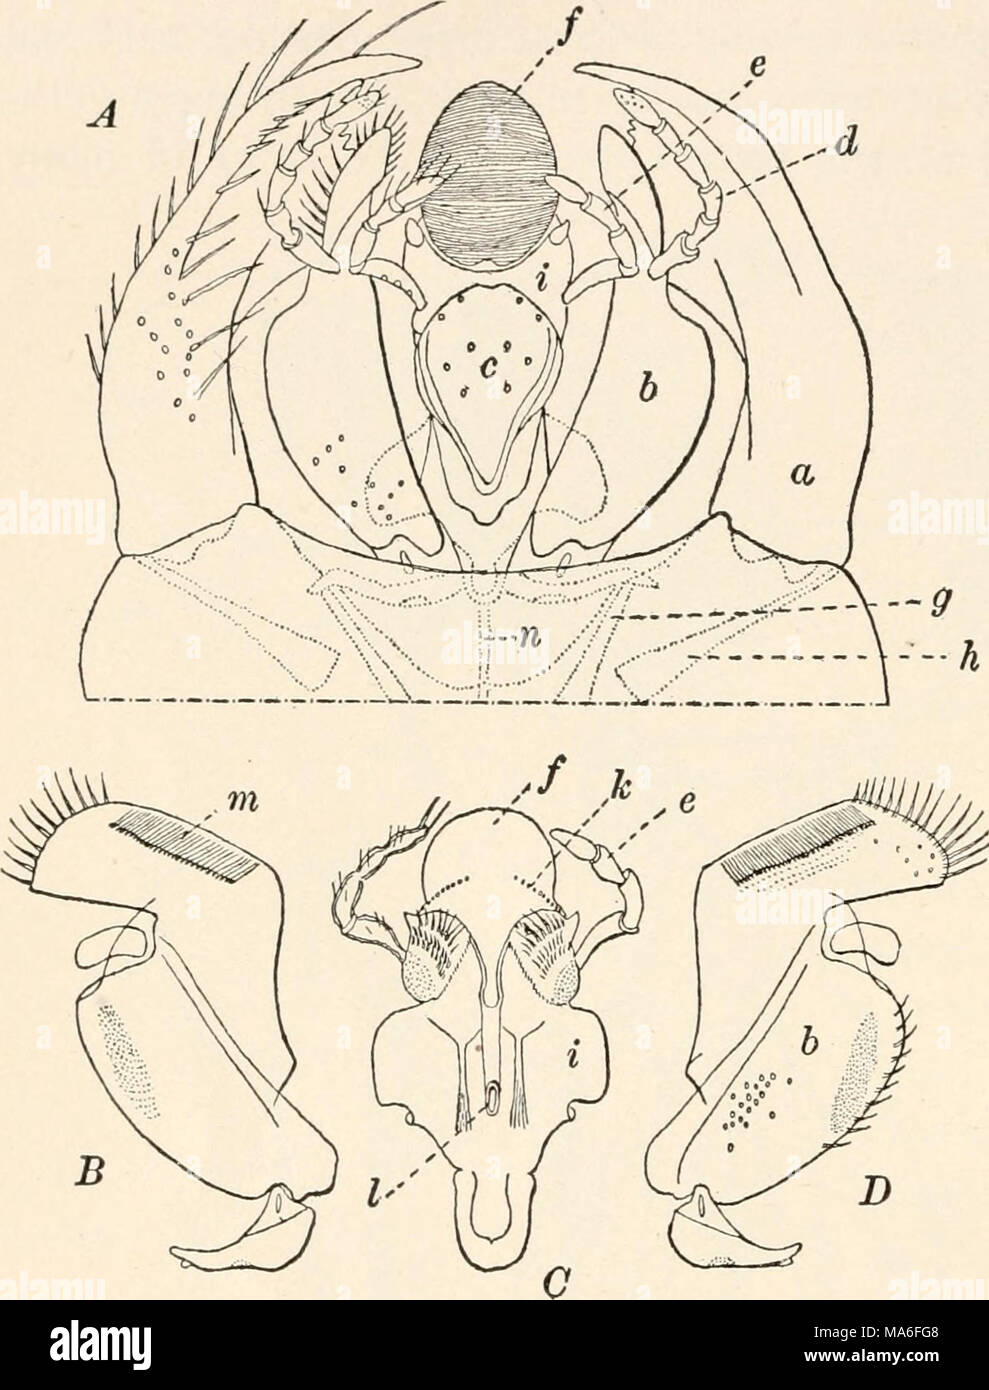 . Elementary entomology . B D FIG. 22. Mouth-parts of an ant (Myrmica rubra) A, seen from the lower side in situ; B and D, maxillae; C, labium seen from the upper side, detached ; a, mandible; t&gt;, maxilla; c, mentum ; rf, maxillary palp; e, labial palp ; f, glossa or tongue ; g, adductor muscle of mandible ; //, abductor muscle of mandible ; /, labium ; k, gustatory organs; /, duct of salivary glands; ;«, maxillary comb; n, gular apodeme. (After Janet, from Wheeler) Stock Photo